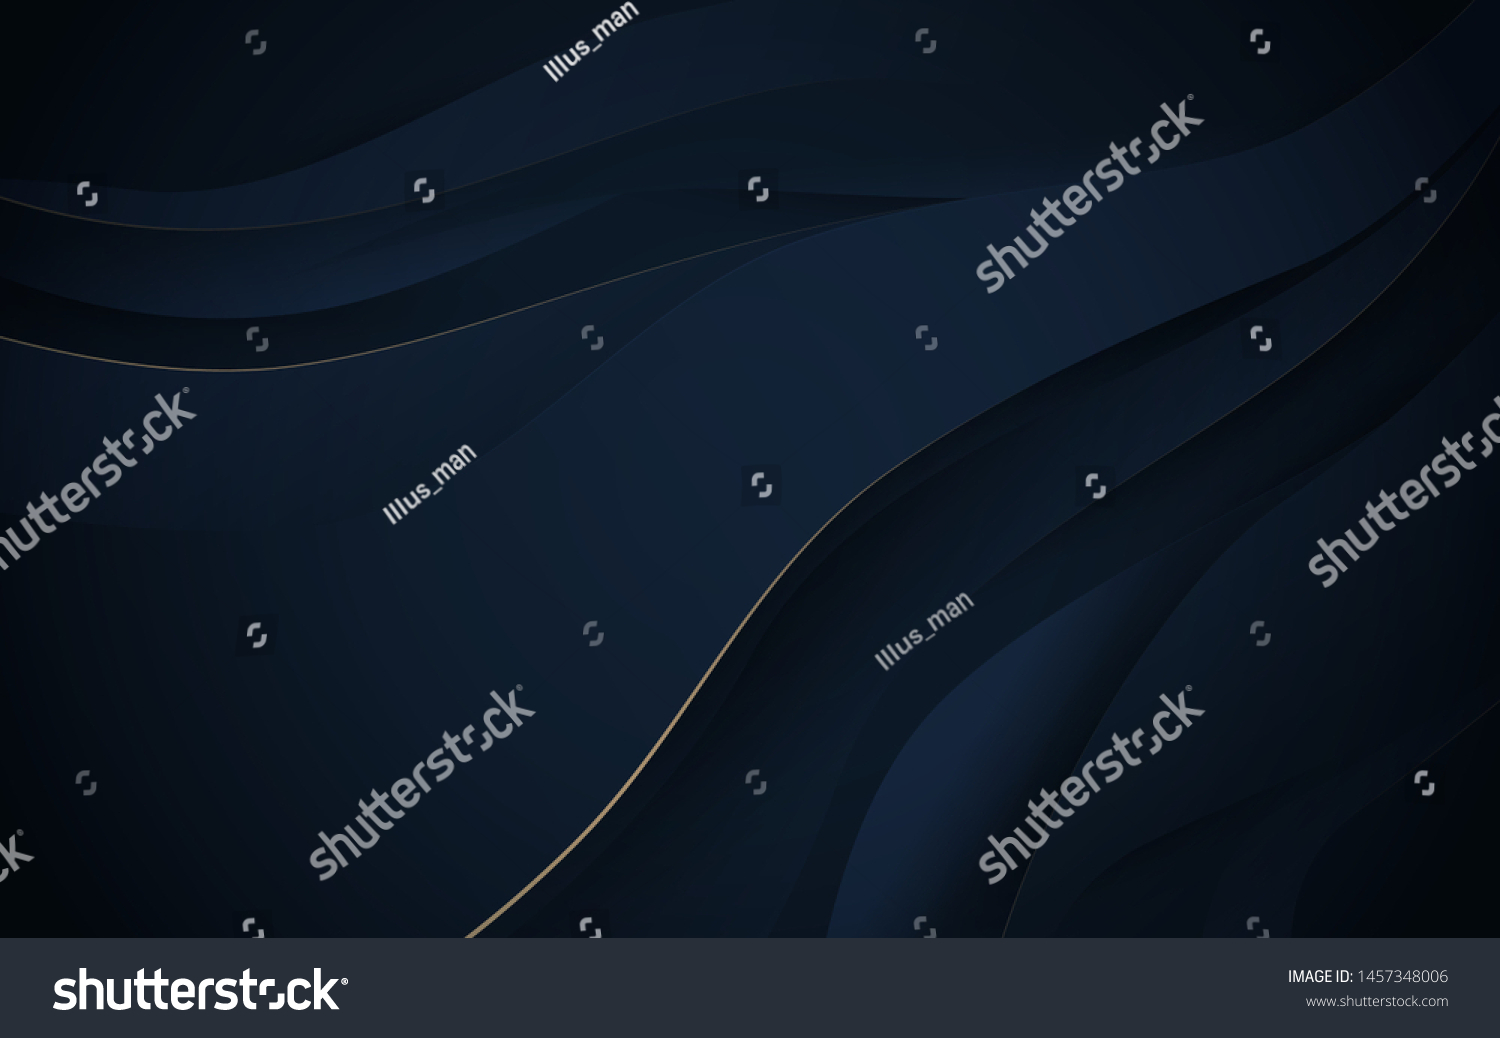 Abstract wavy luxury dark blue and gold background. Illustration vector #1457348006